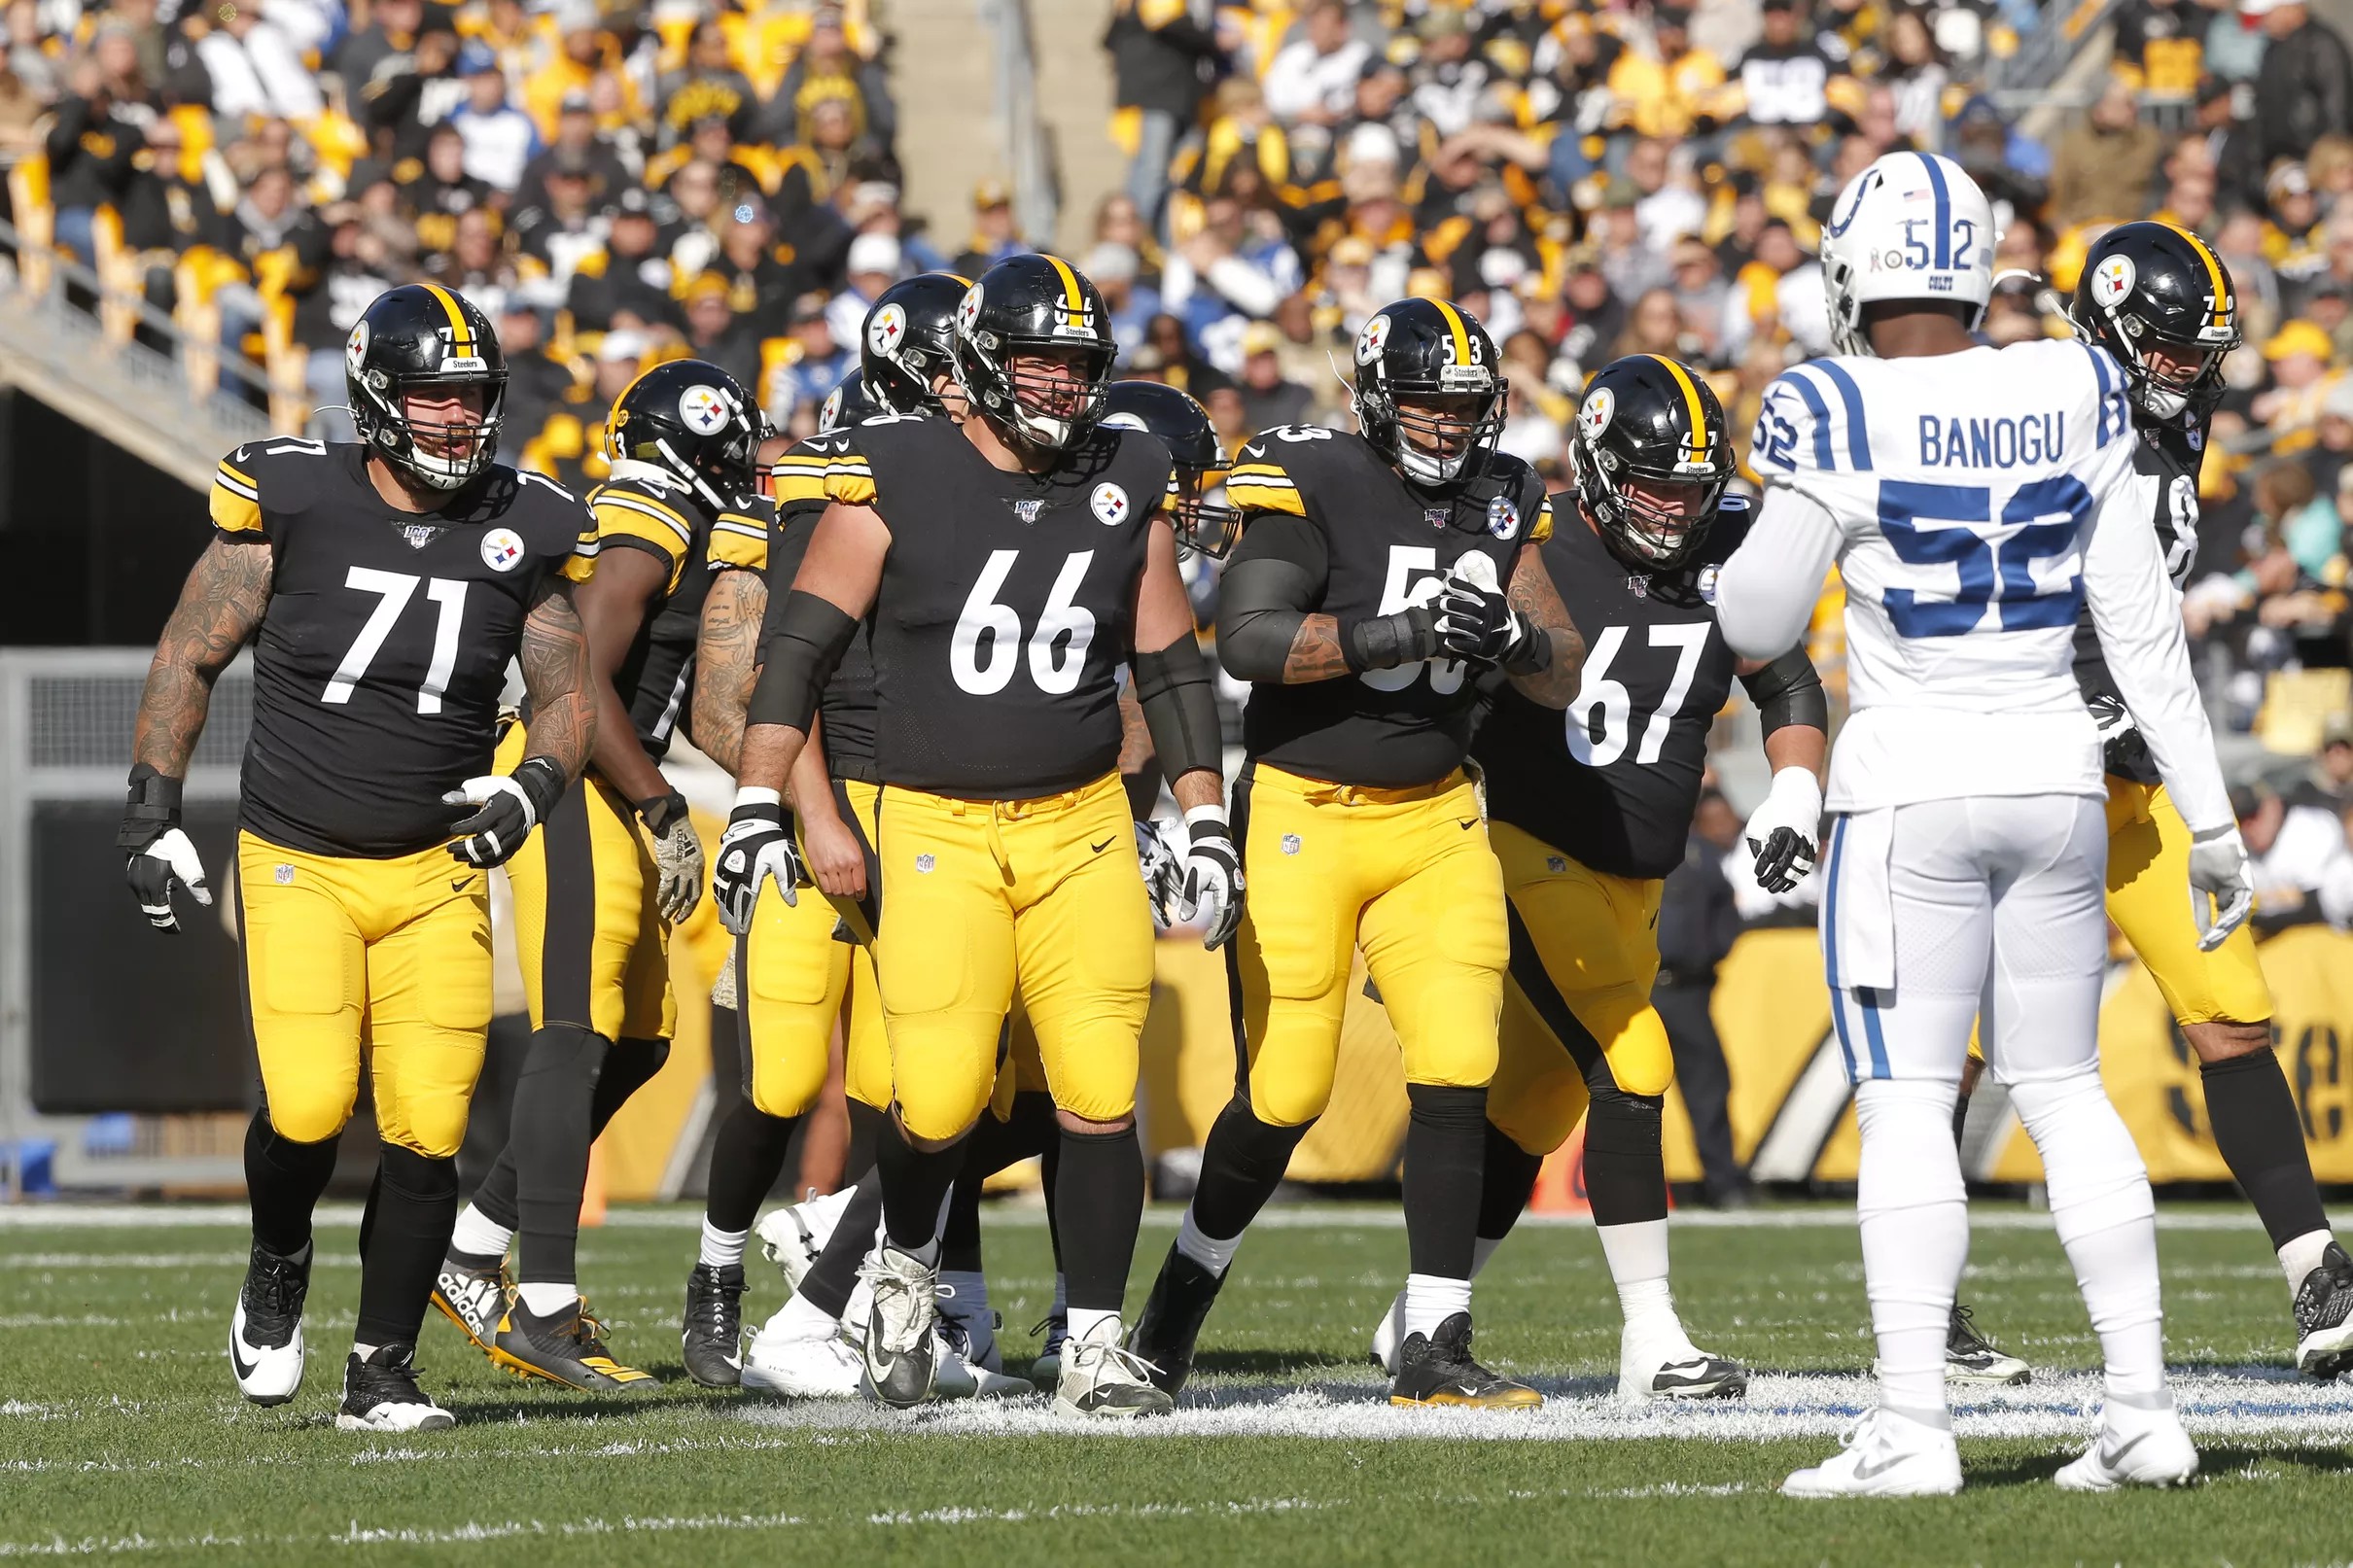 Pro Football Focus ranks the top offensive lines in the NFL, and the  Steelers are in the Top 10